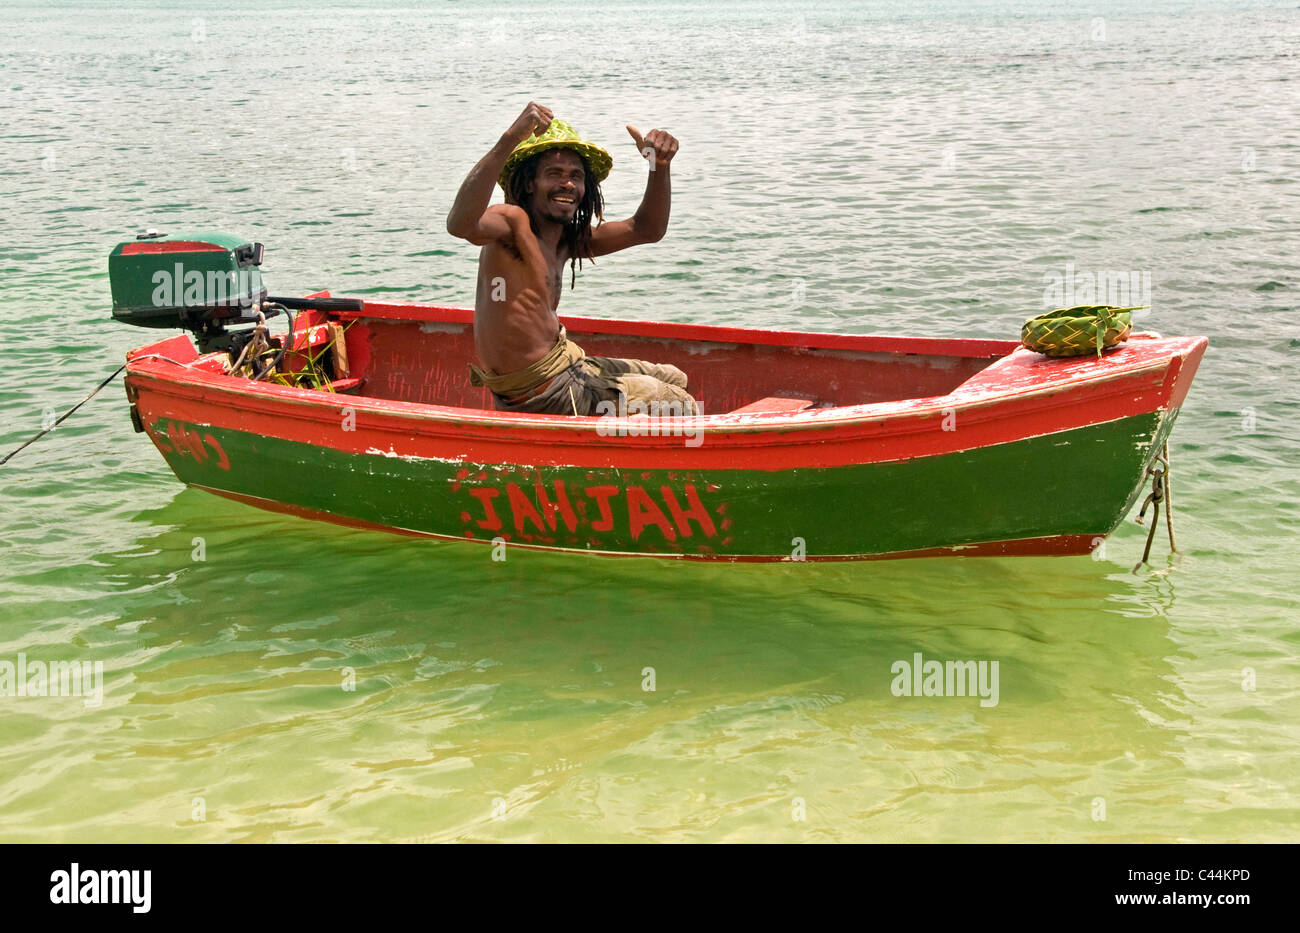 St Lucian Local Man with Palm Frond Products in Red Boat with Thumbs up, St Lucia, Caribbean Sea, West Indies Stock Photo